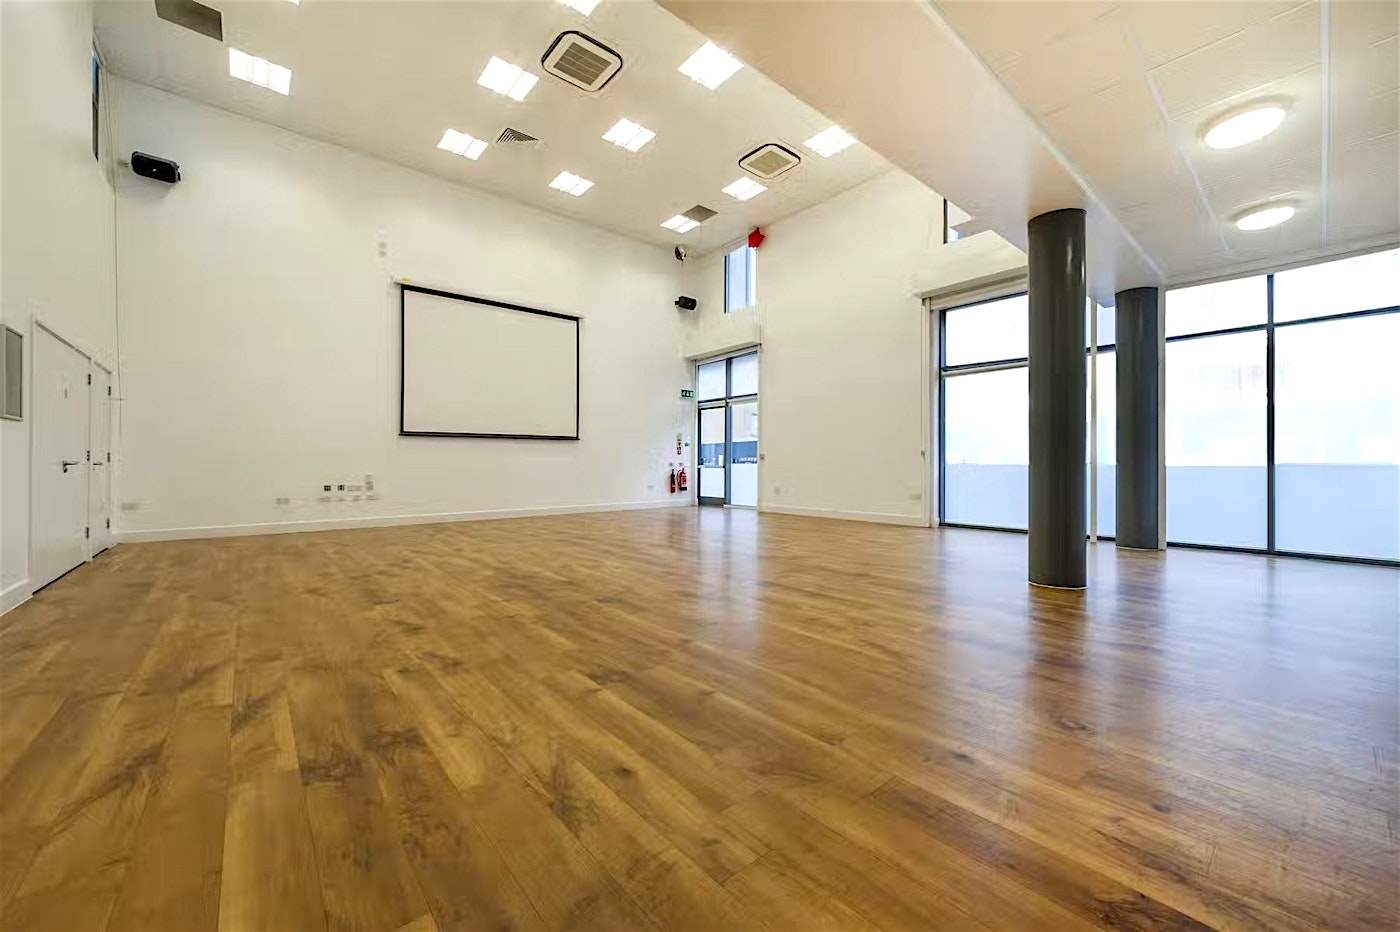 There is room for up to 100 people at this London rehearsal studio